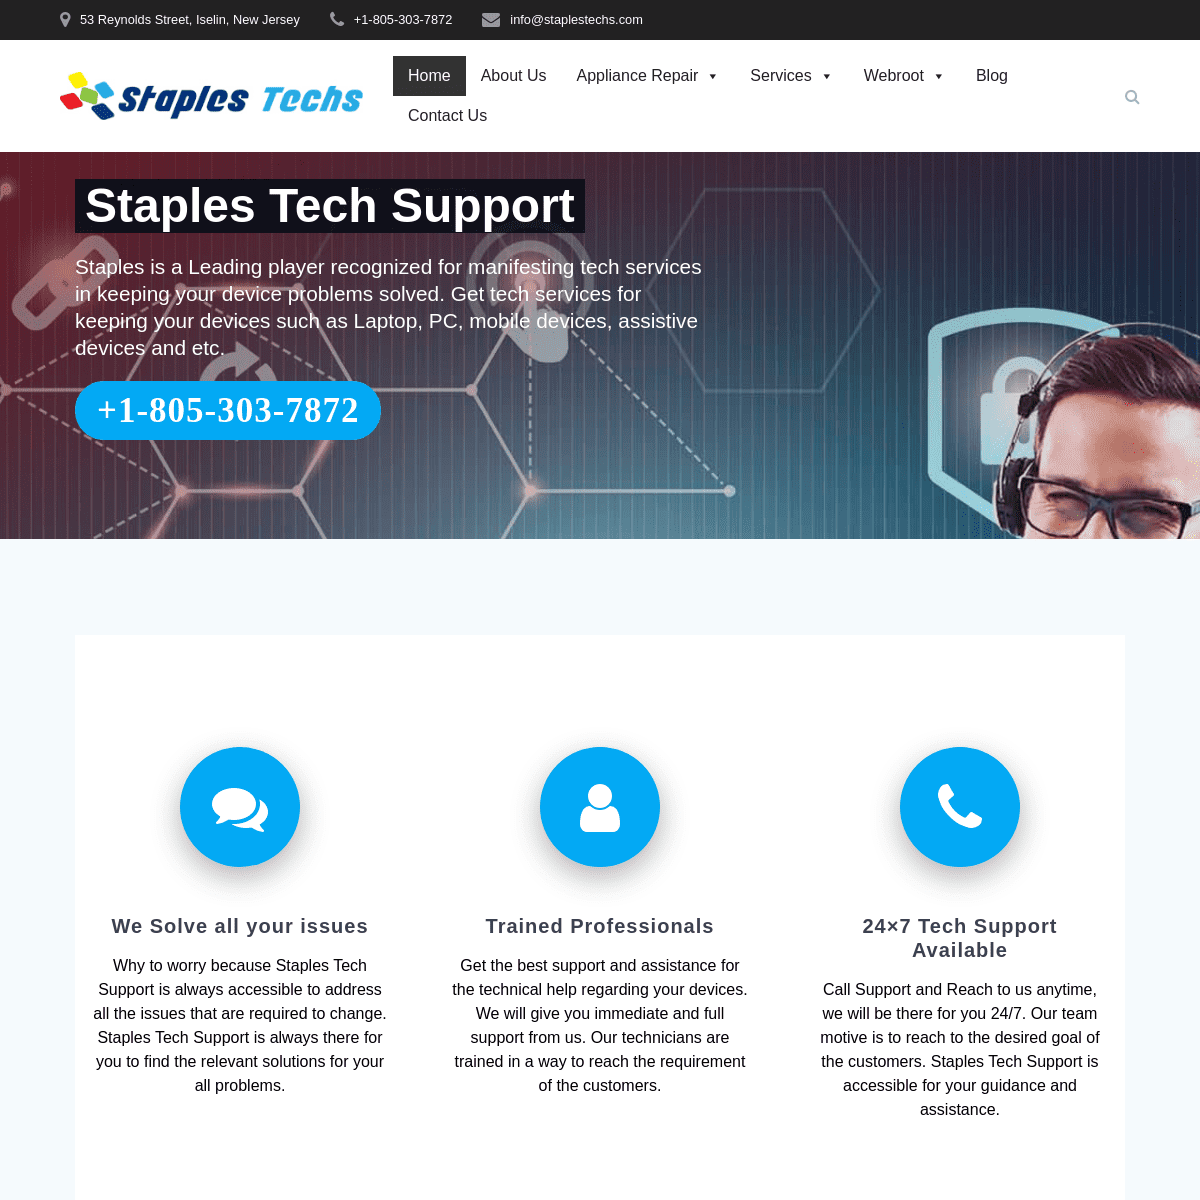 A complete backup of https://staplestechs.com